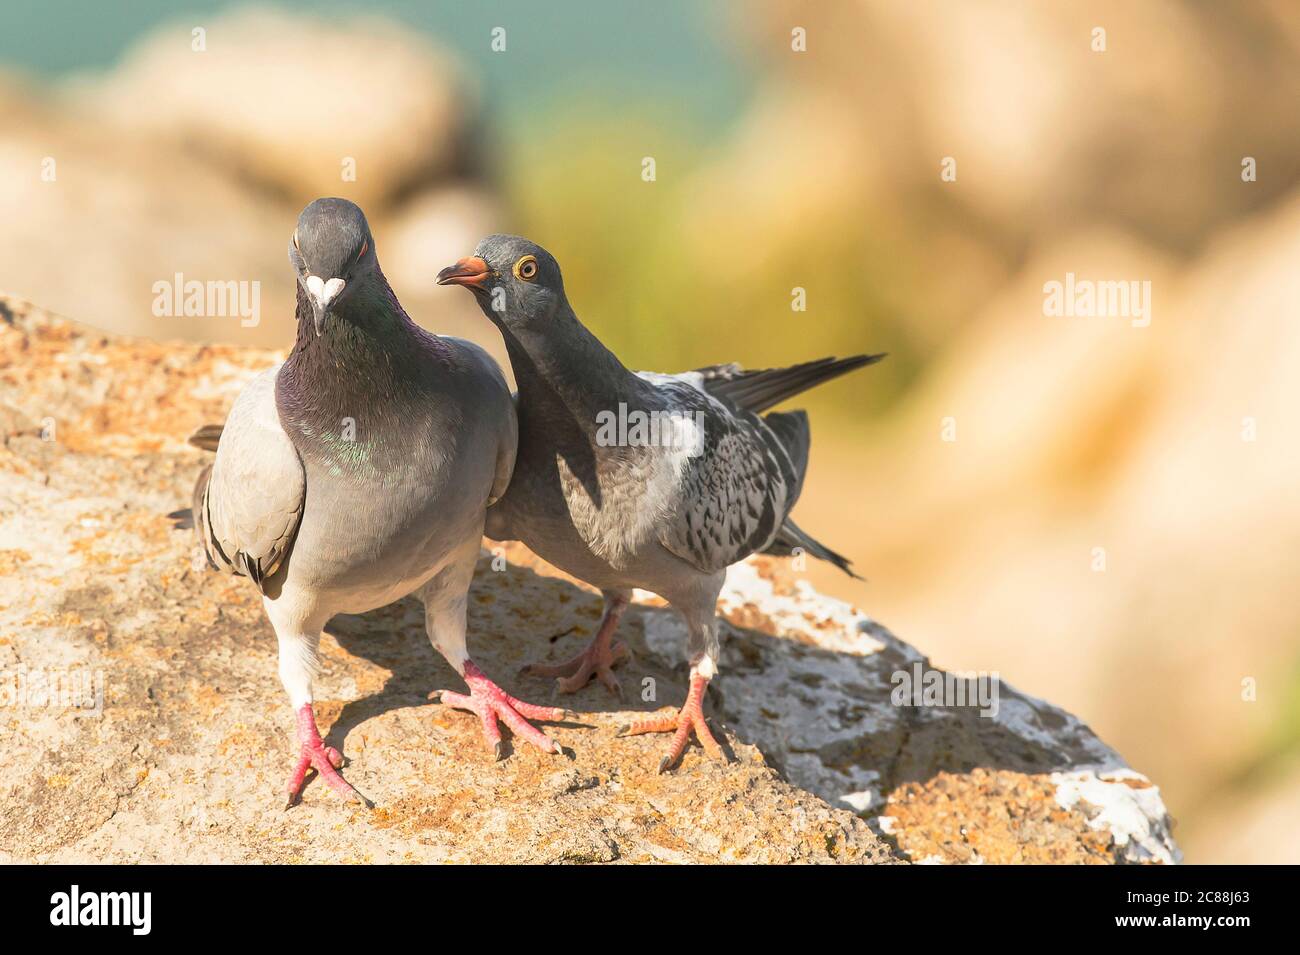 Columba livia.Resident located in the Mediterranean area. Reaches high flights in areas of nesting and feeding. City of Peniche. Portugal. Stock Photo